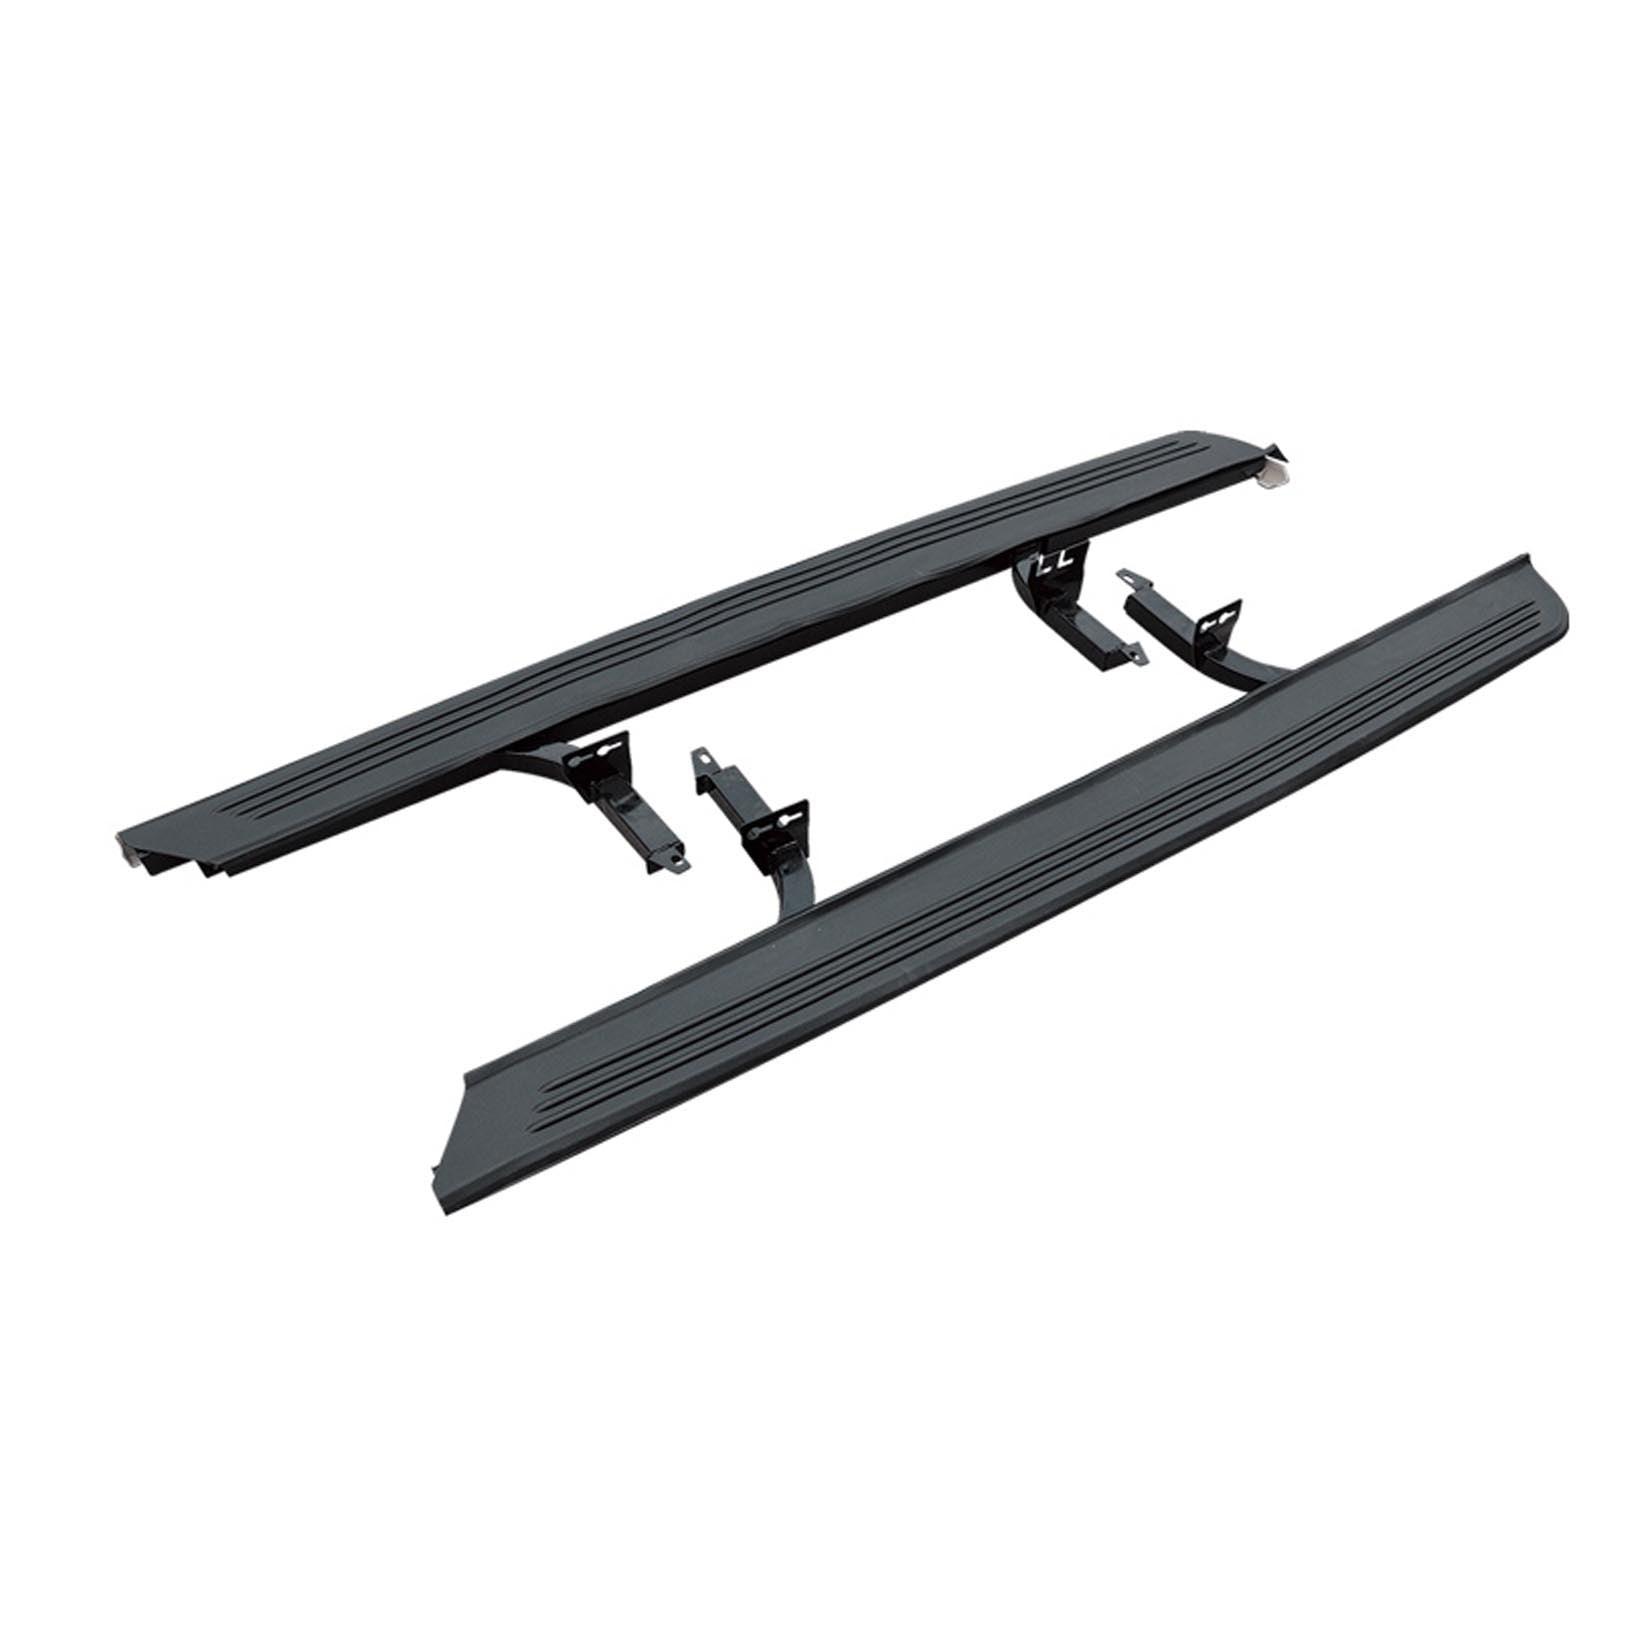 RANGE ROVER VOGUE 2002-2012 - OEM STYLE RUNNING BOARDS - SIDE STEPS - PAIR - Storm Xccessories2